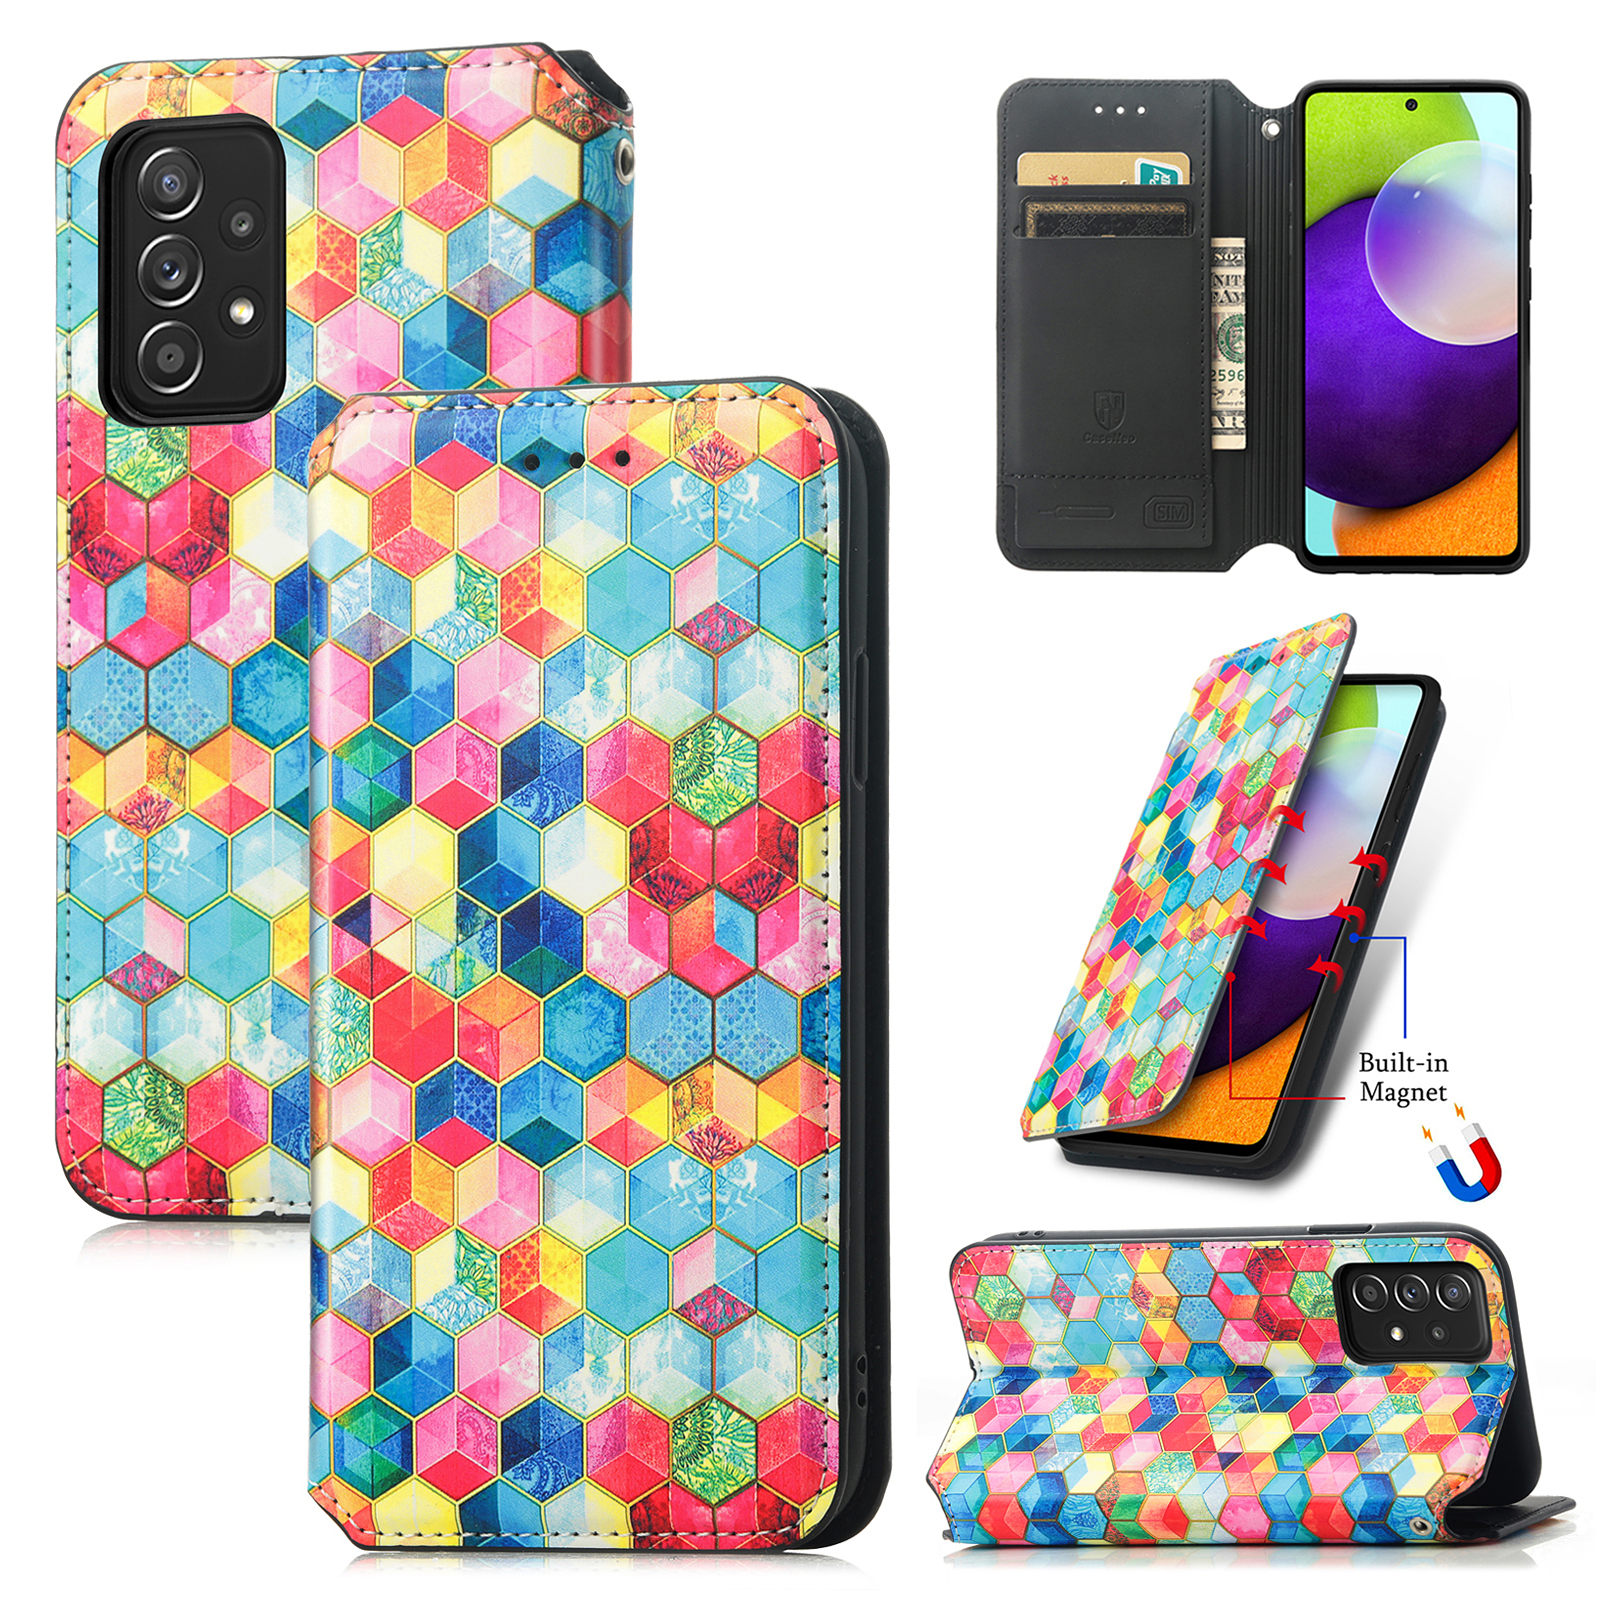 Case for Samsung Galaxy S21 FE Case, Galaxy S21 FE Case Wallet Case PU Leather and Hard PC RFID Blocking Slim Durable Protective Phone Case Cover For Samsung Galaxy S21 FE,Cube - image 1 of 9